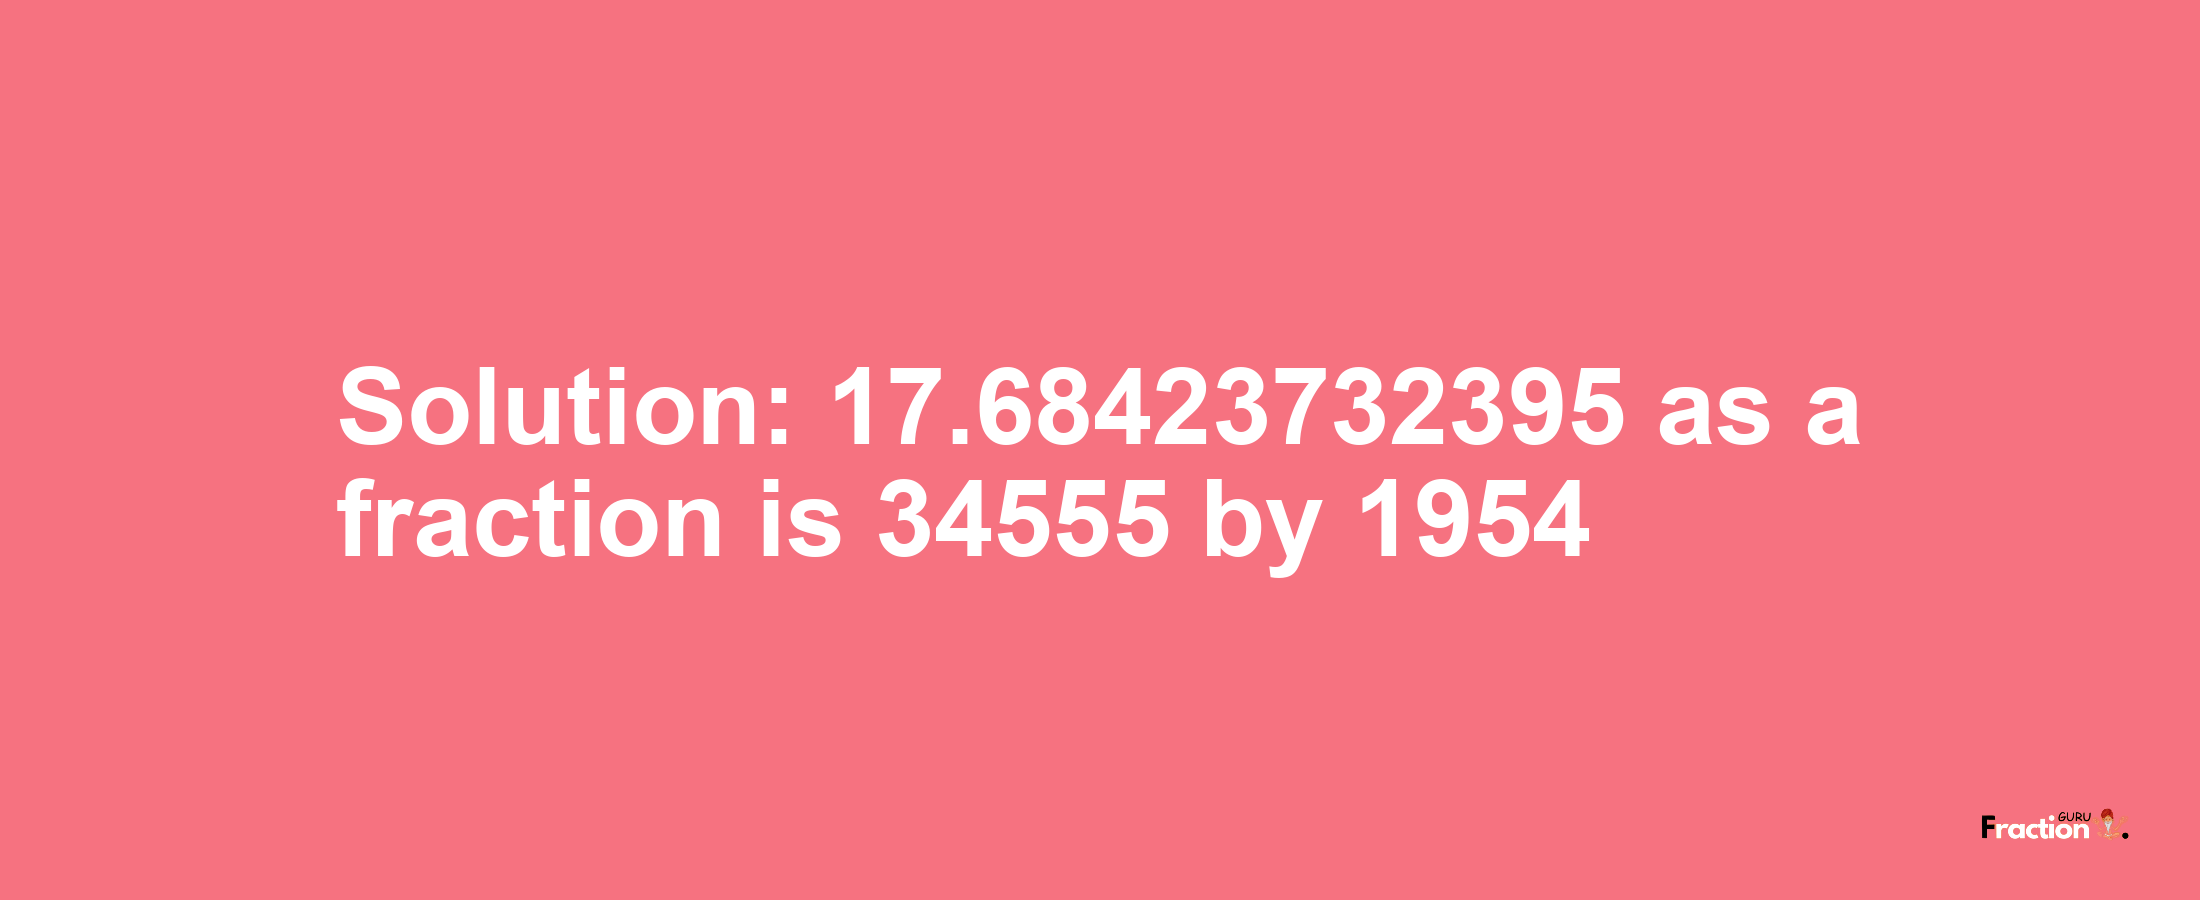 Solution:17.68423732395 as a fraction is 34555/1954